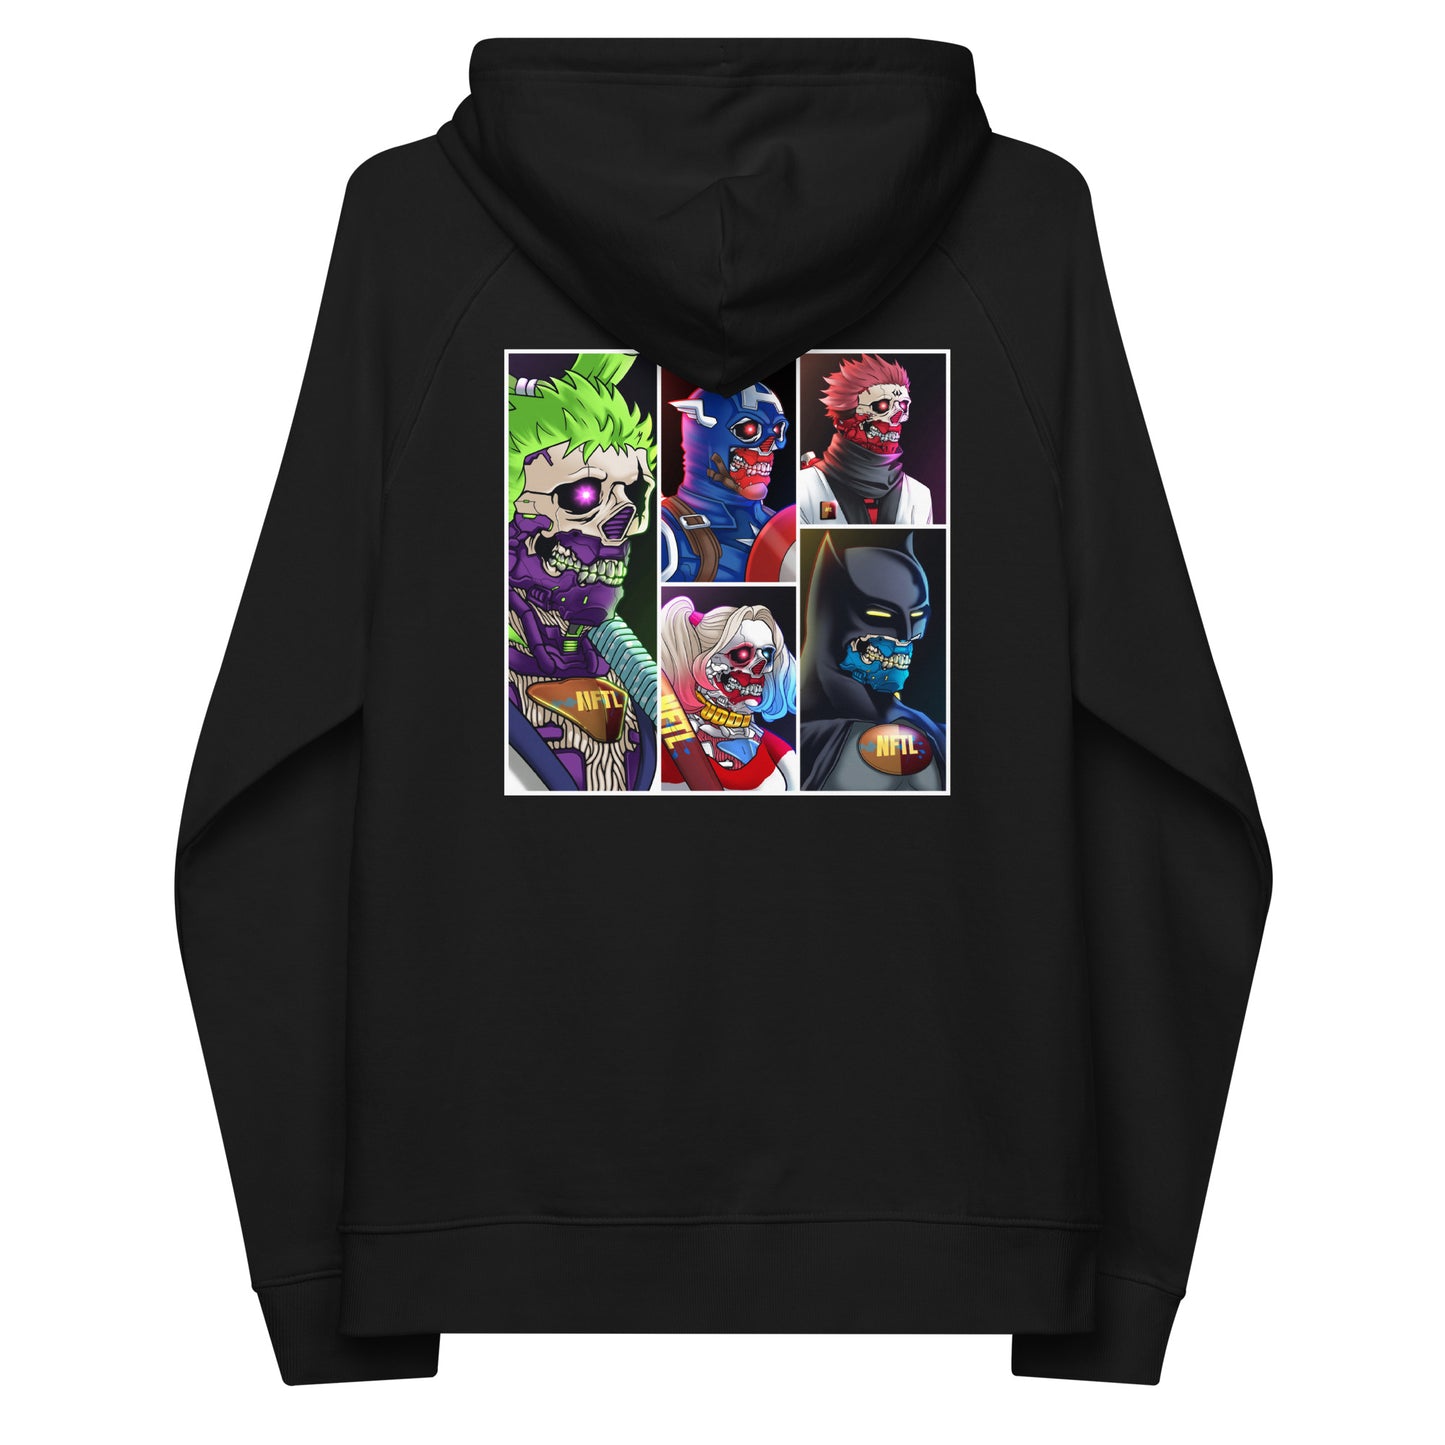 Unisex $NFTL hoodie Limited Edition #1